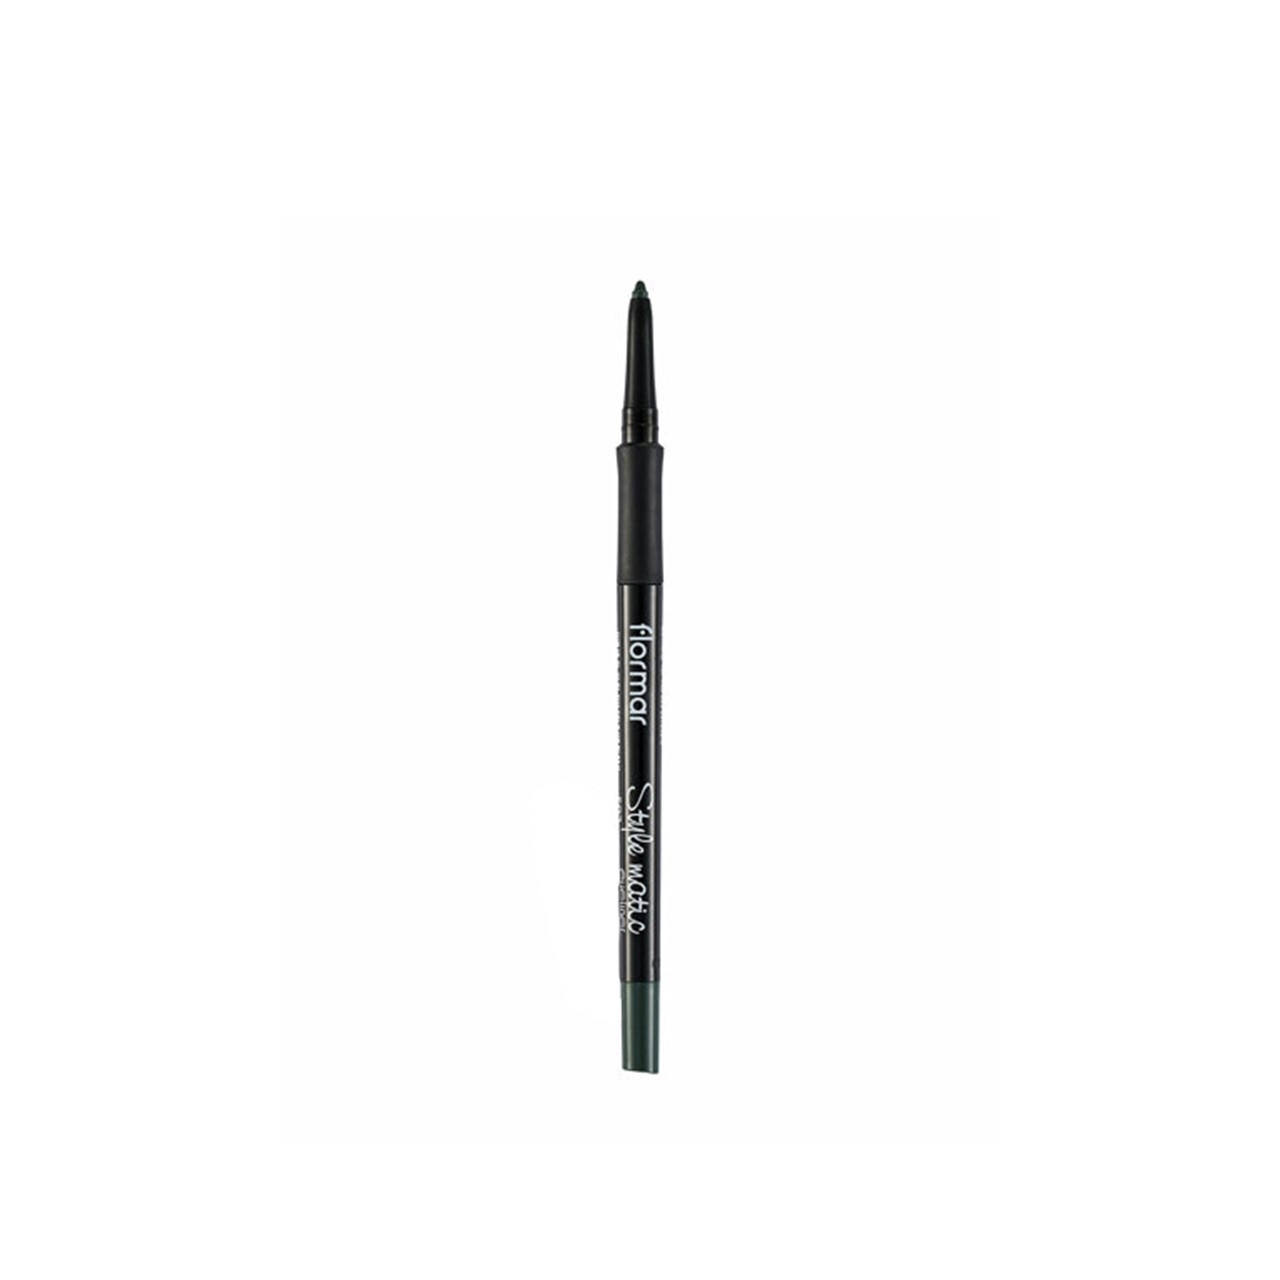 Flormar Stylematic Eyeliner 08 Serious Green 0.35g